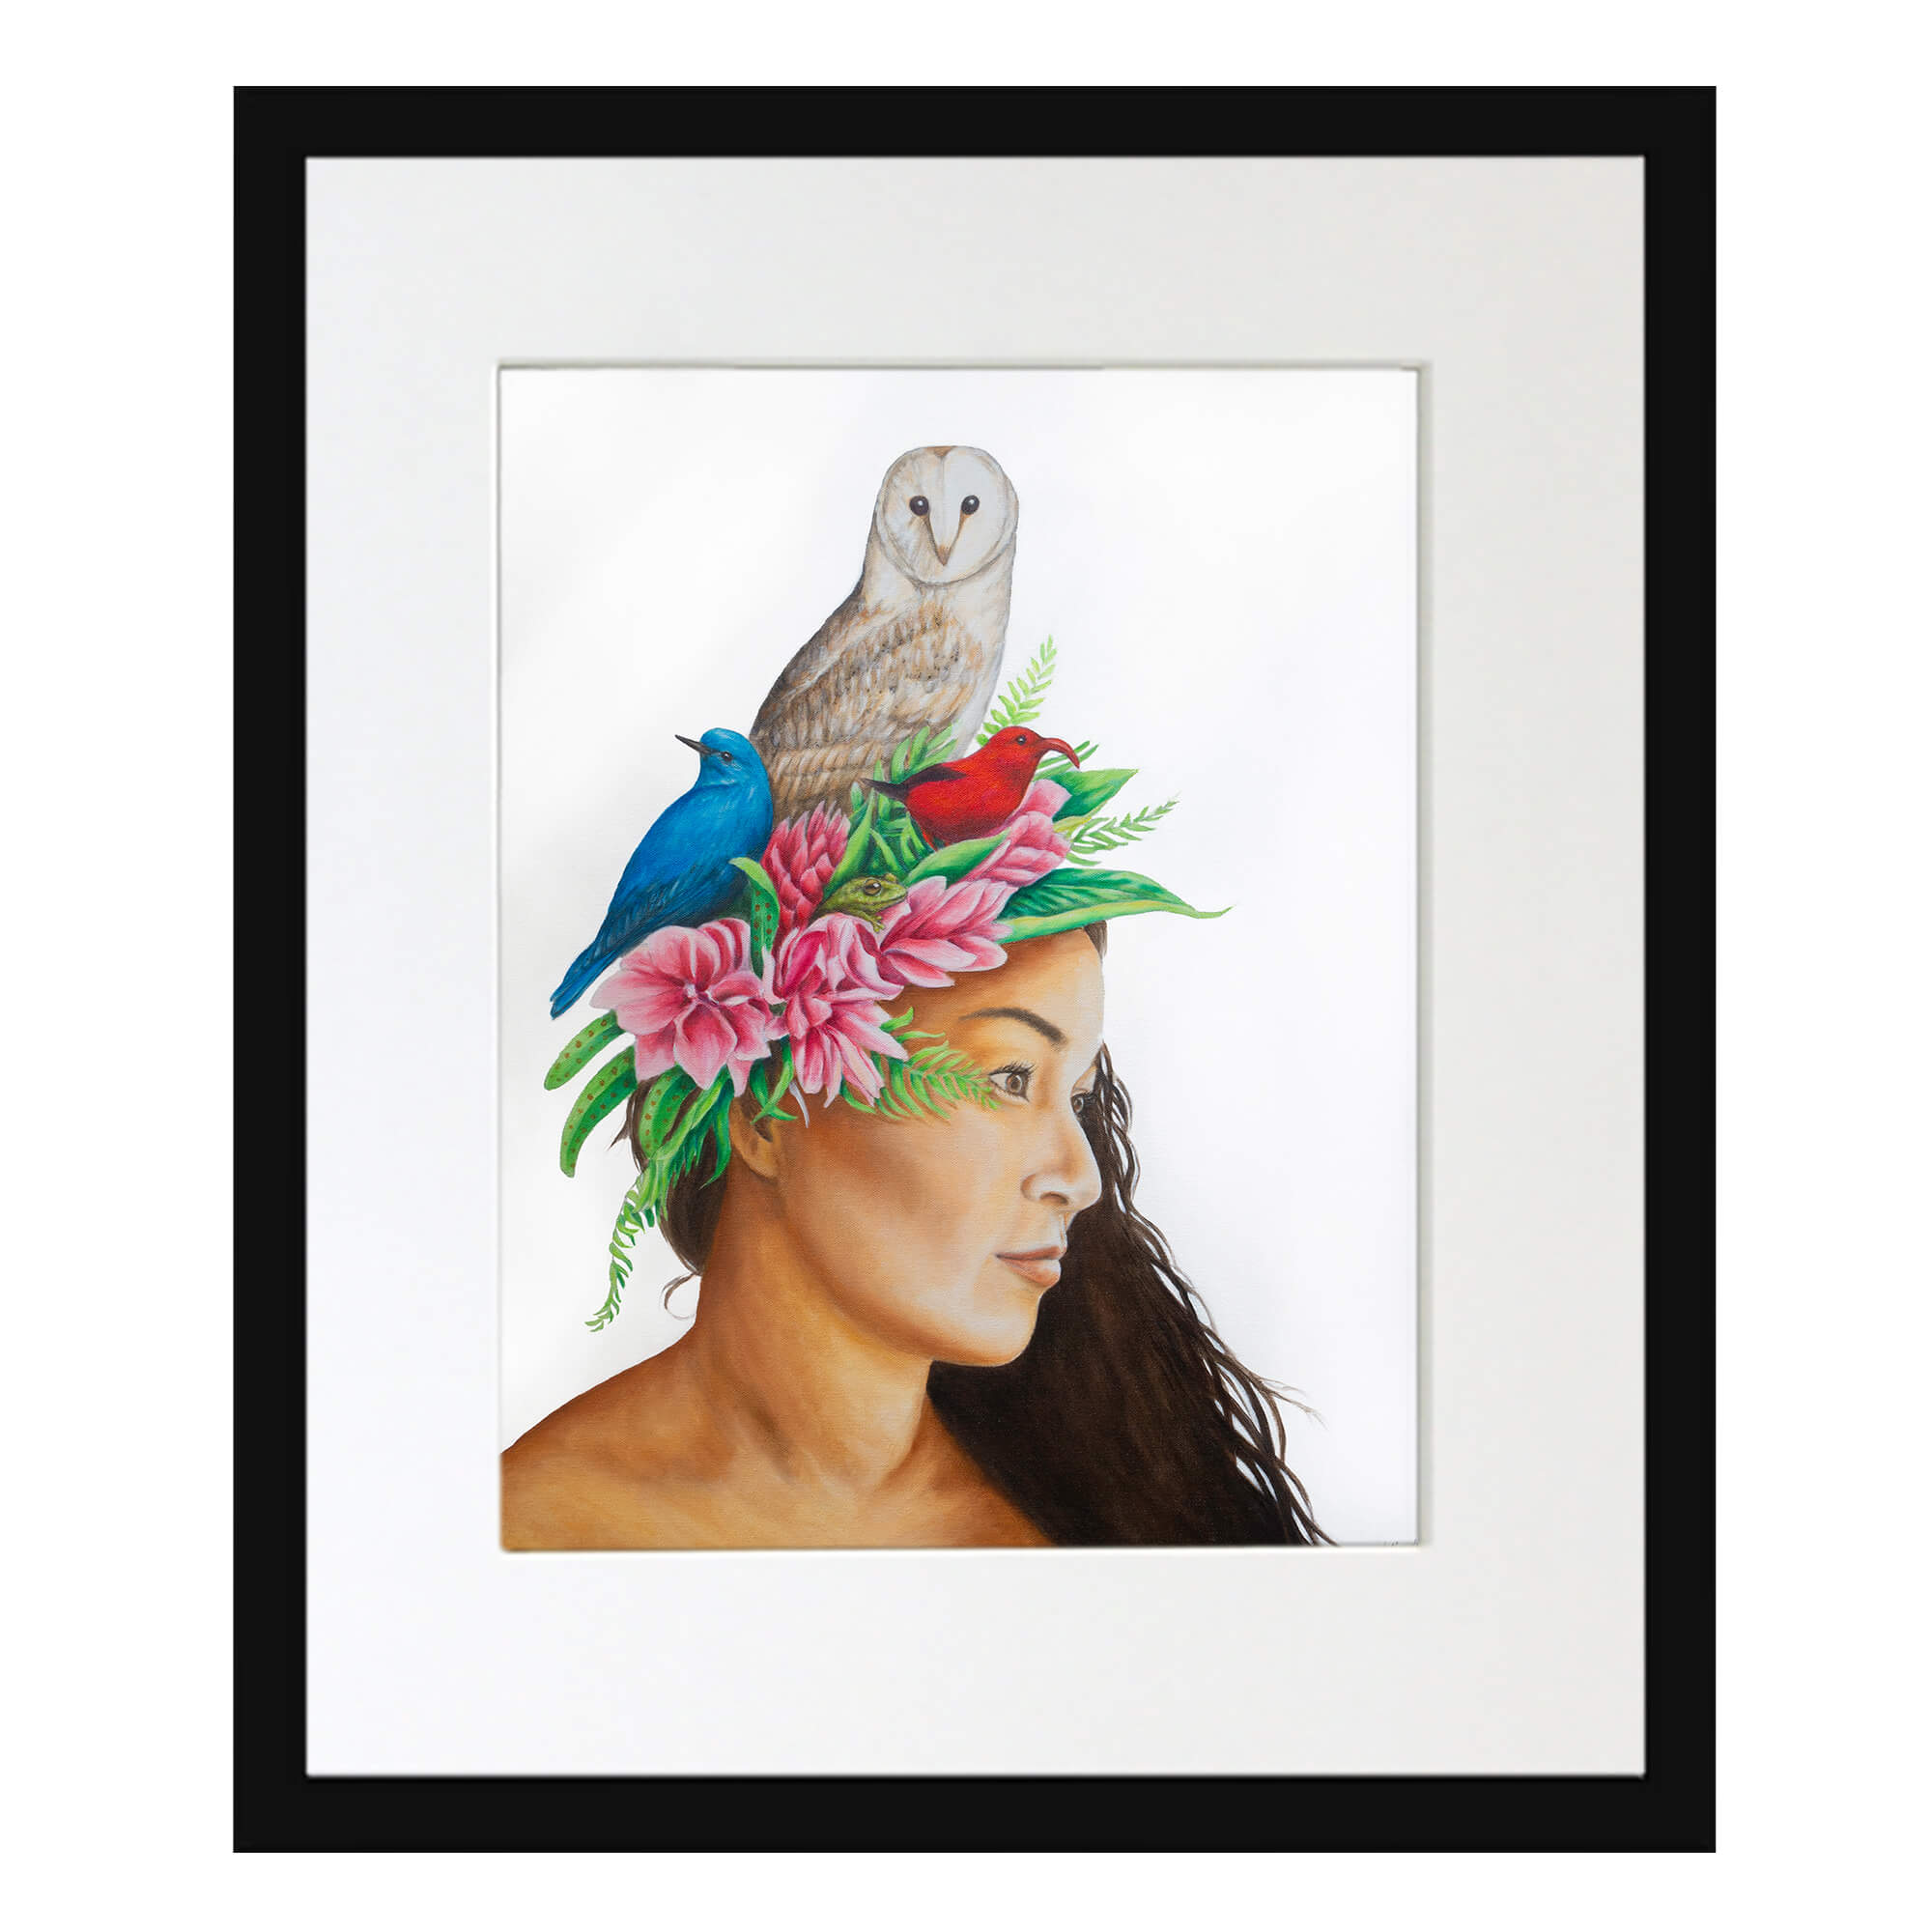 A matted art print with black frame featuring a a woman with brown hair by hawaii artist Kelly Keane